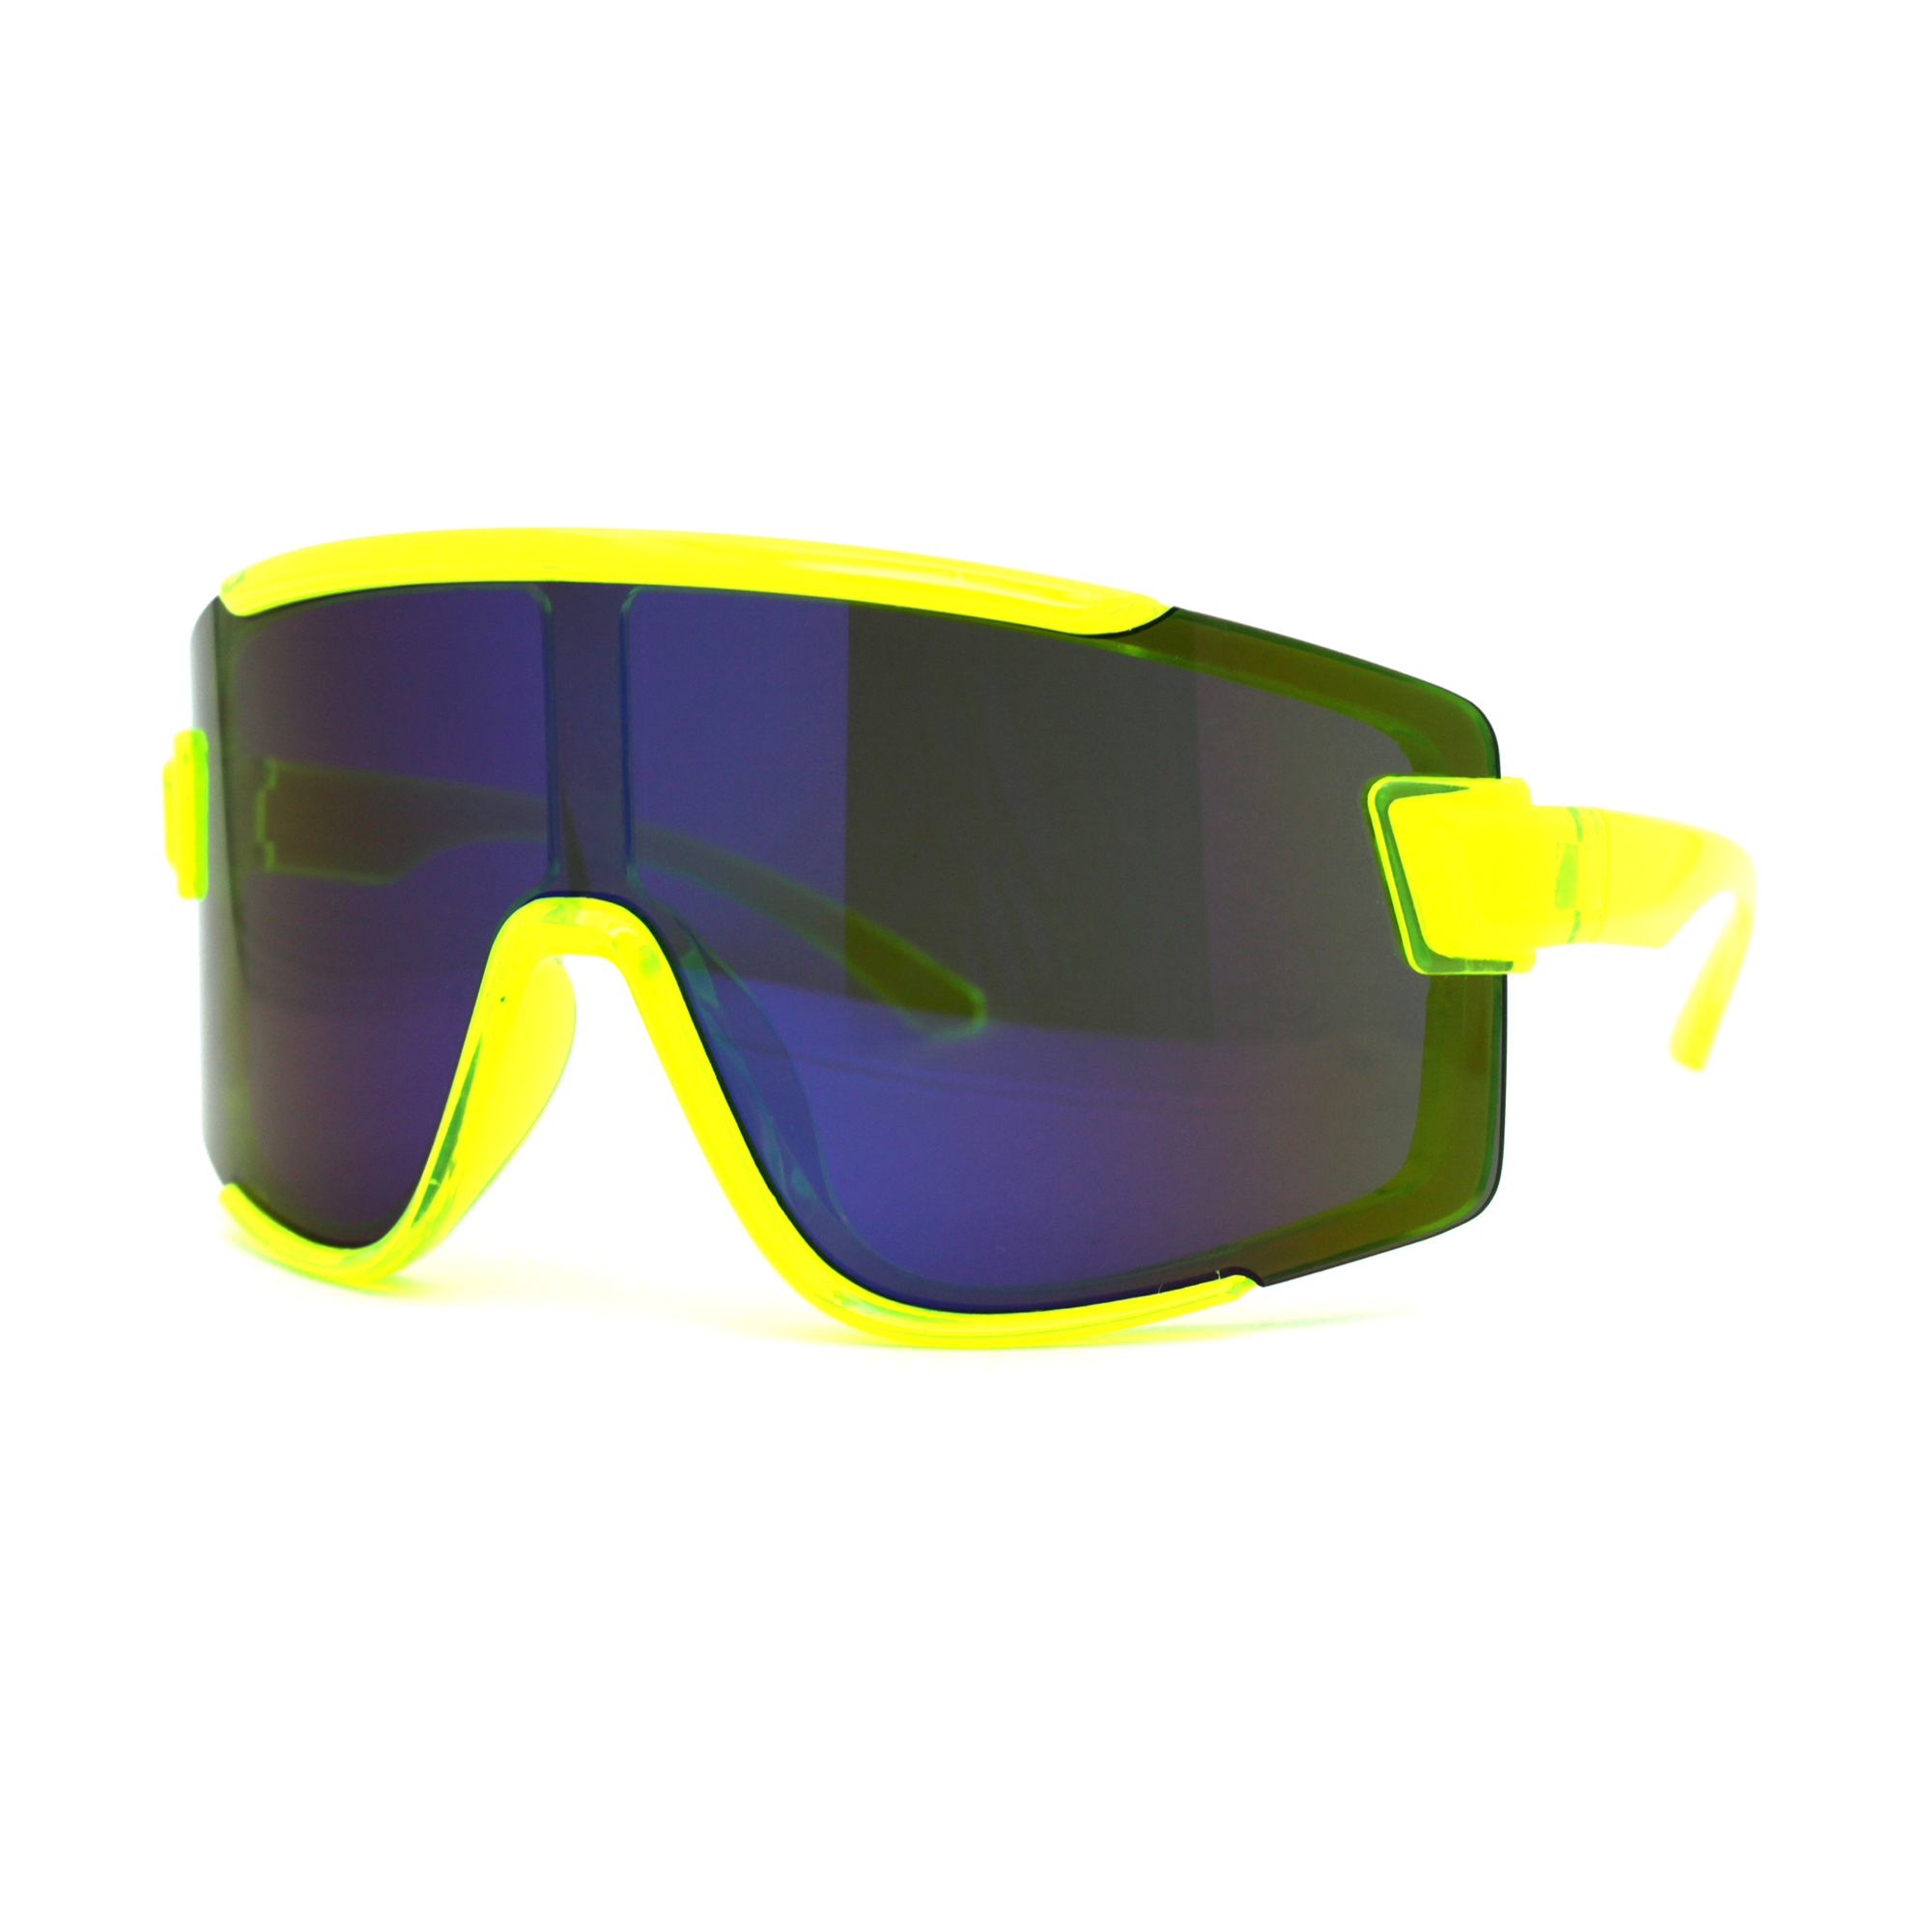 Mens Color Mirror Exposed Lens Large Shield Sunglasses Yellow Blue Mirror - image 2 of 4